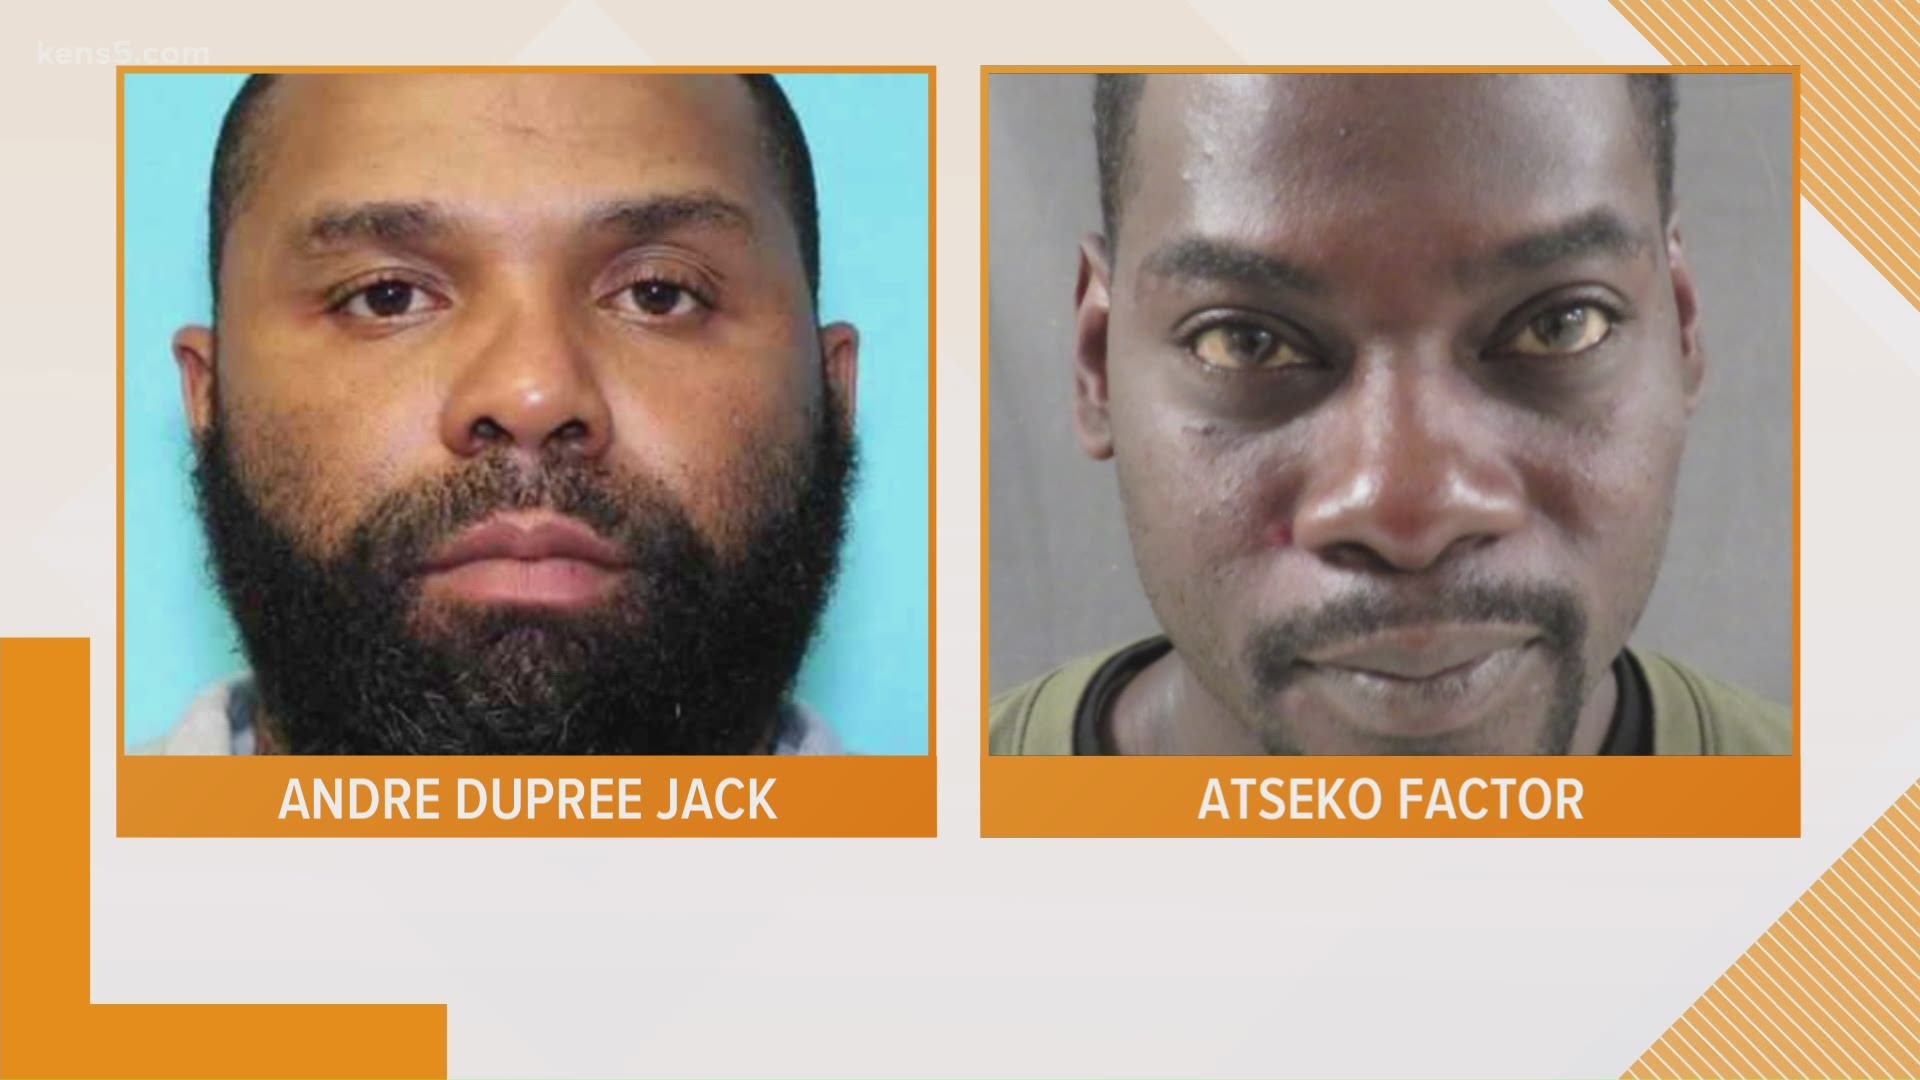 Police are searching for 38-year-old Andre Dupree Jack and Atseko Factor, who authorities say are considered to be "armed and dangerous."